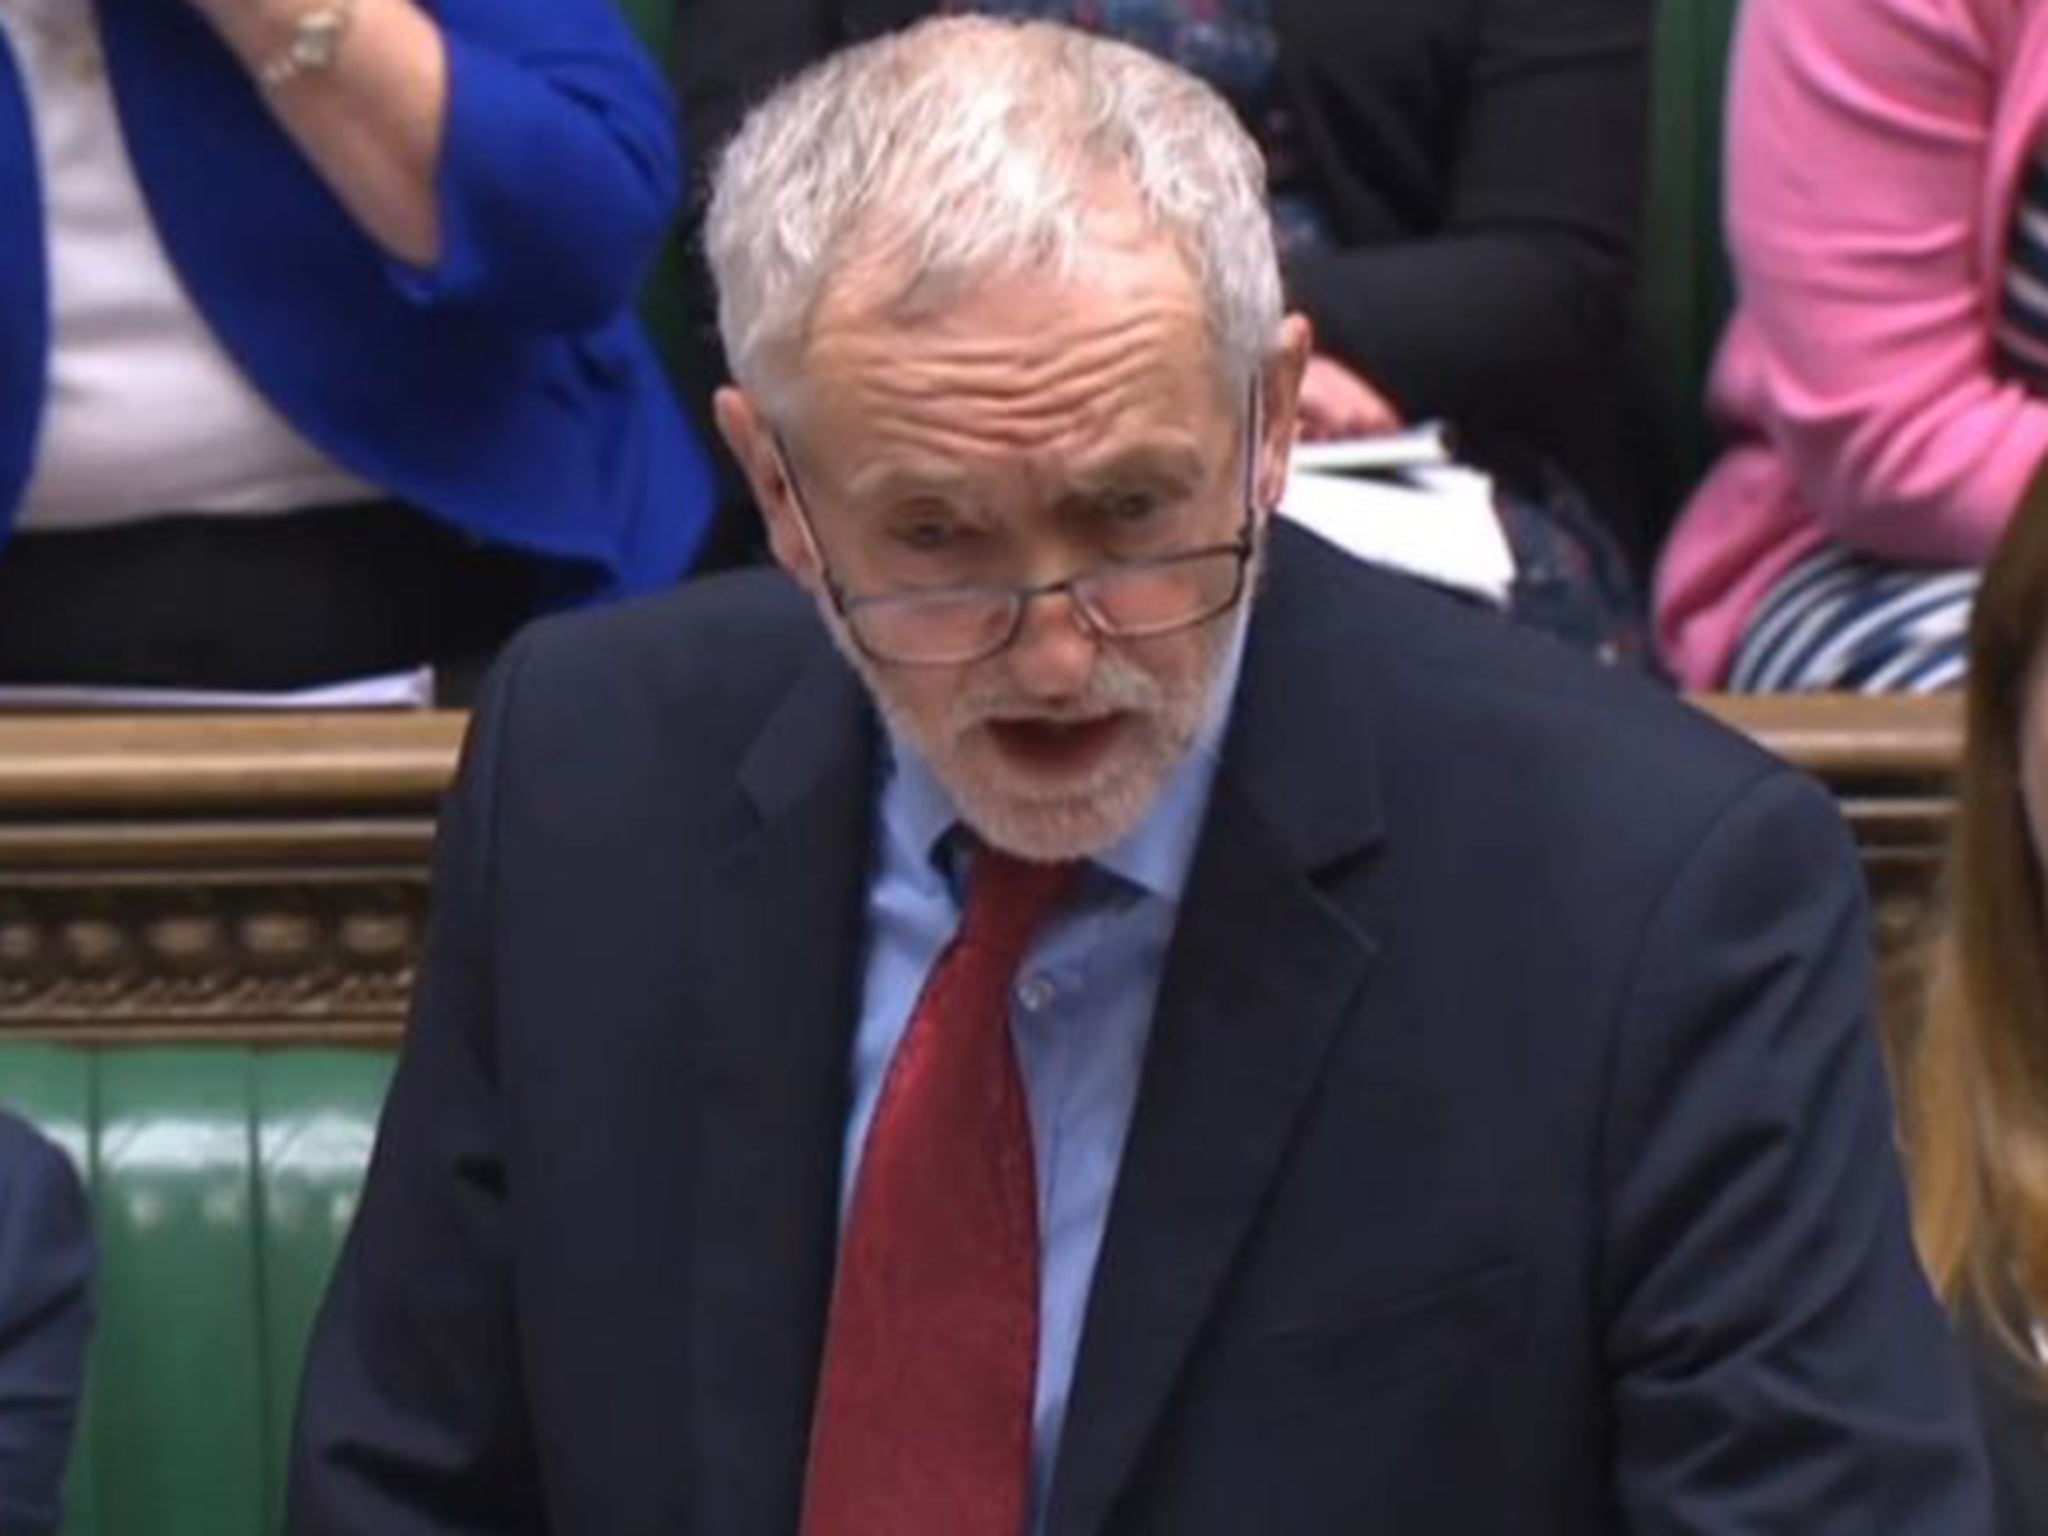 Jeremy Corbyn said the SNP is wrong to assume the single market 'is a membership club'